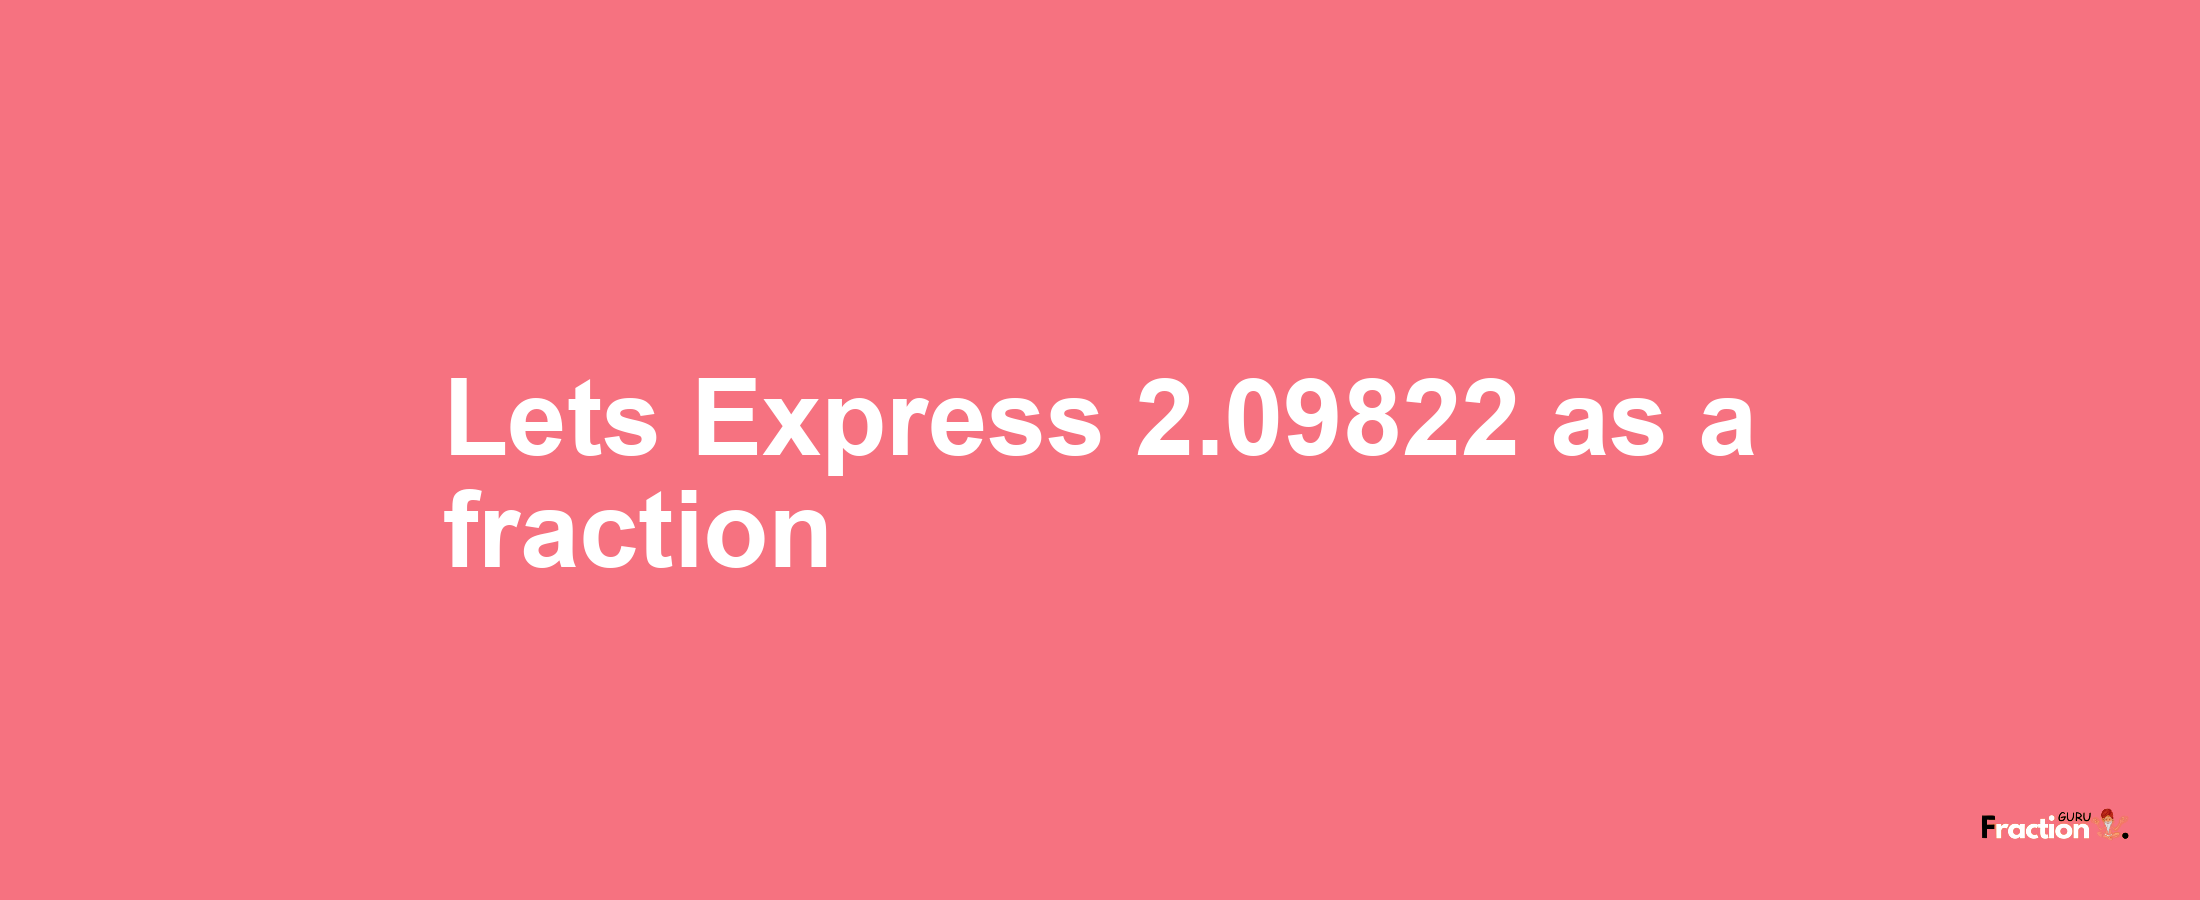 Lets Express 2.09822 as afraction